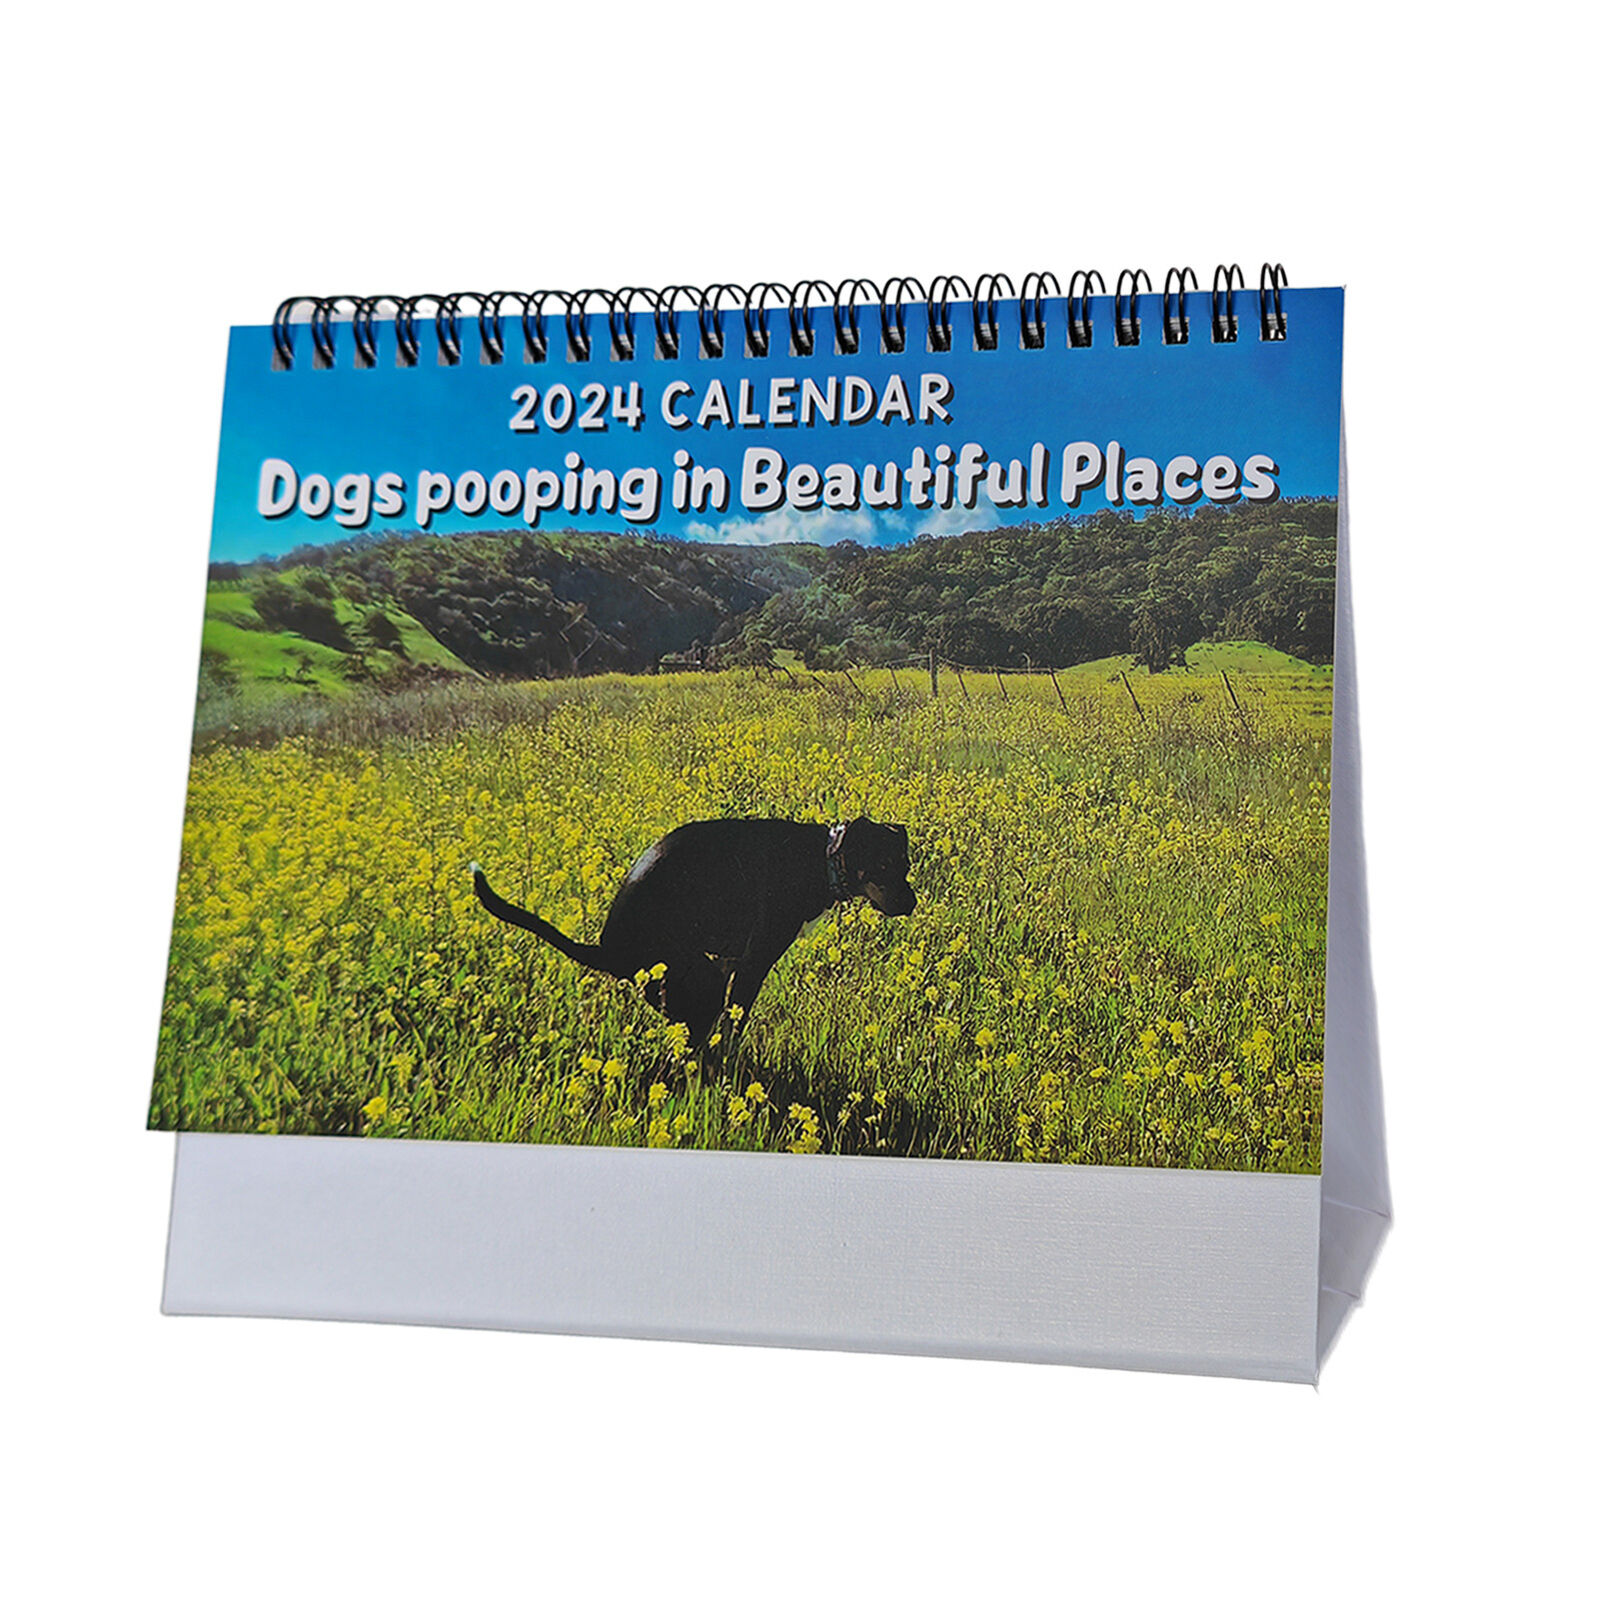 2024 Funny Dog Pooping Wall Calendar Unique Calendar Gift Gag Gift for Friends 